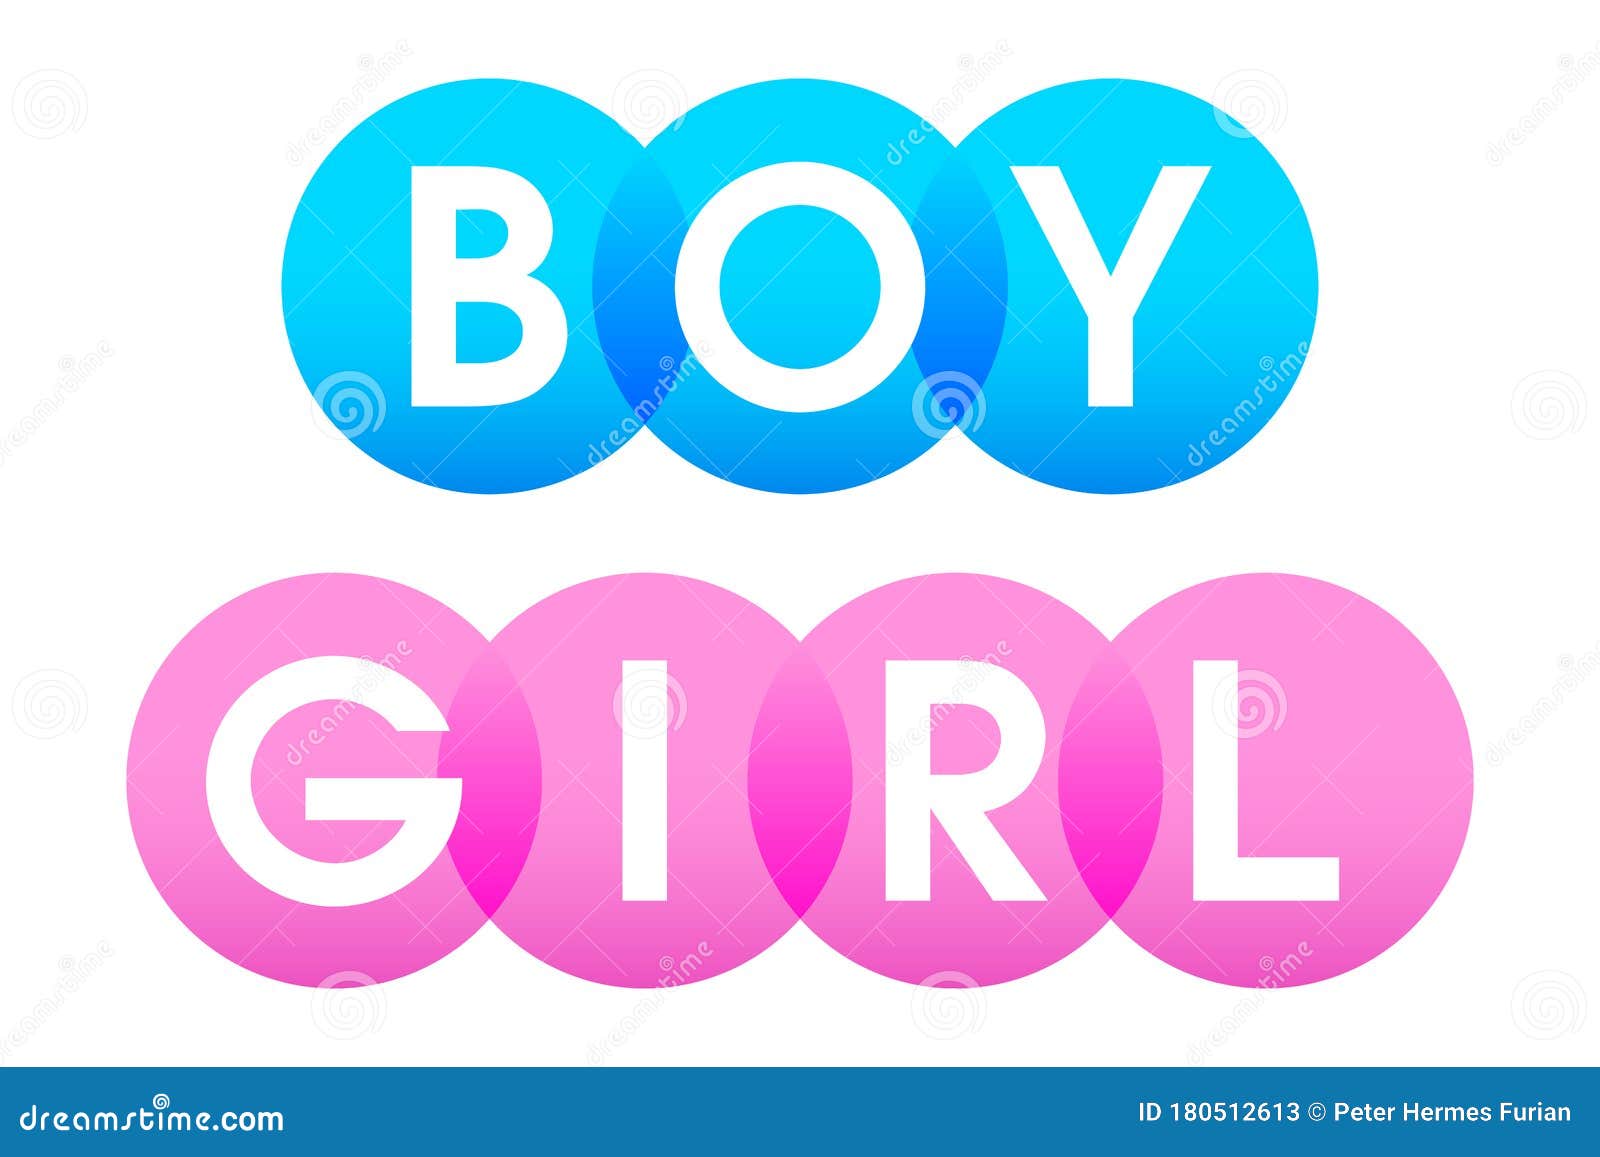 boy and girl letters in white capitals over blue and pink circles